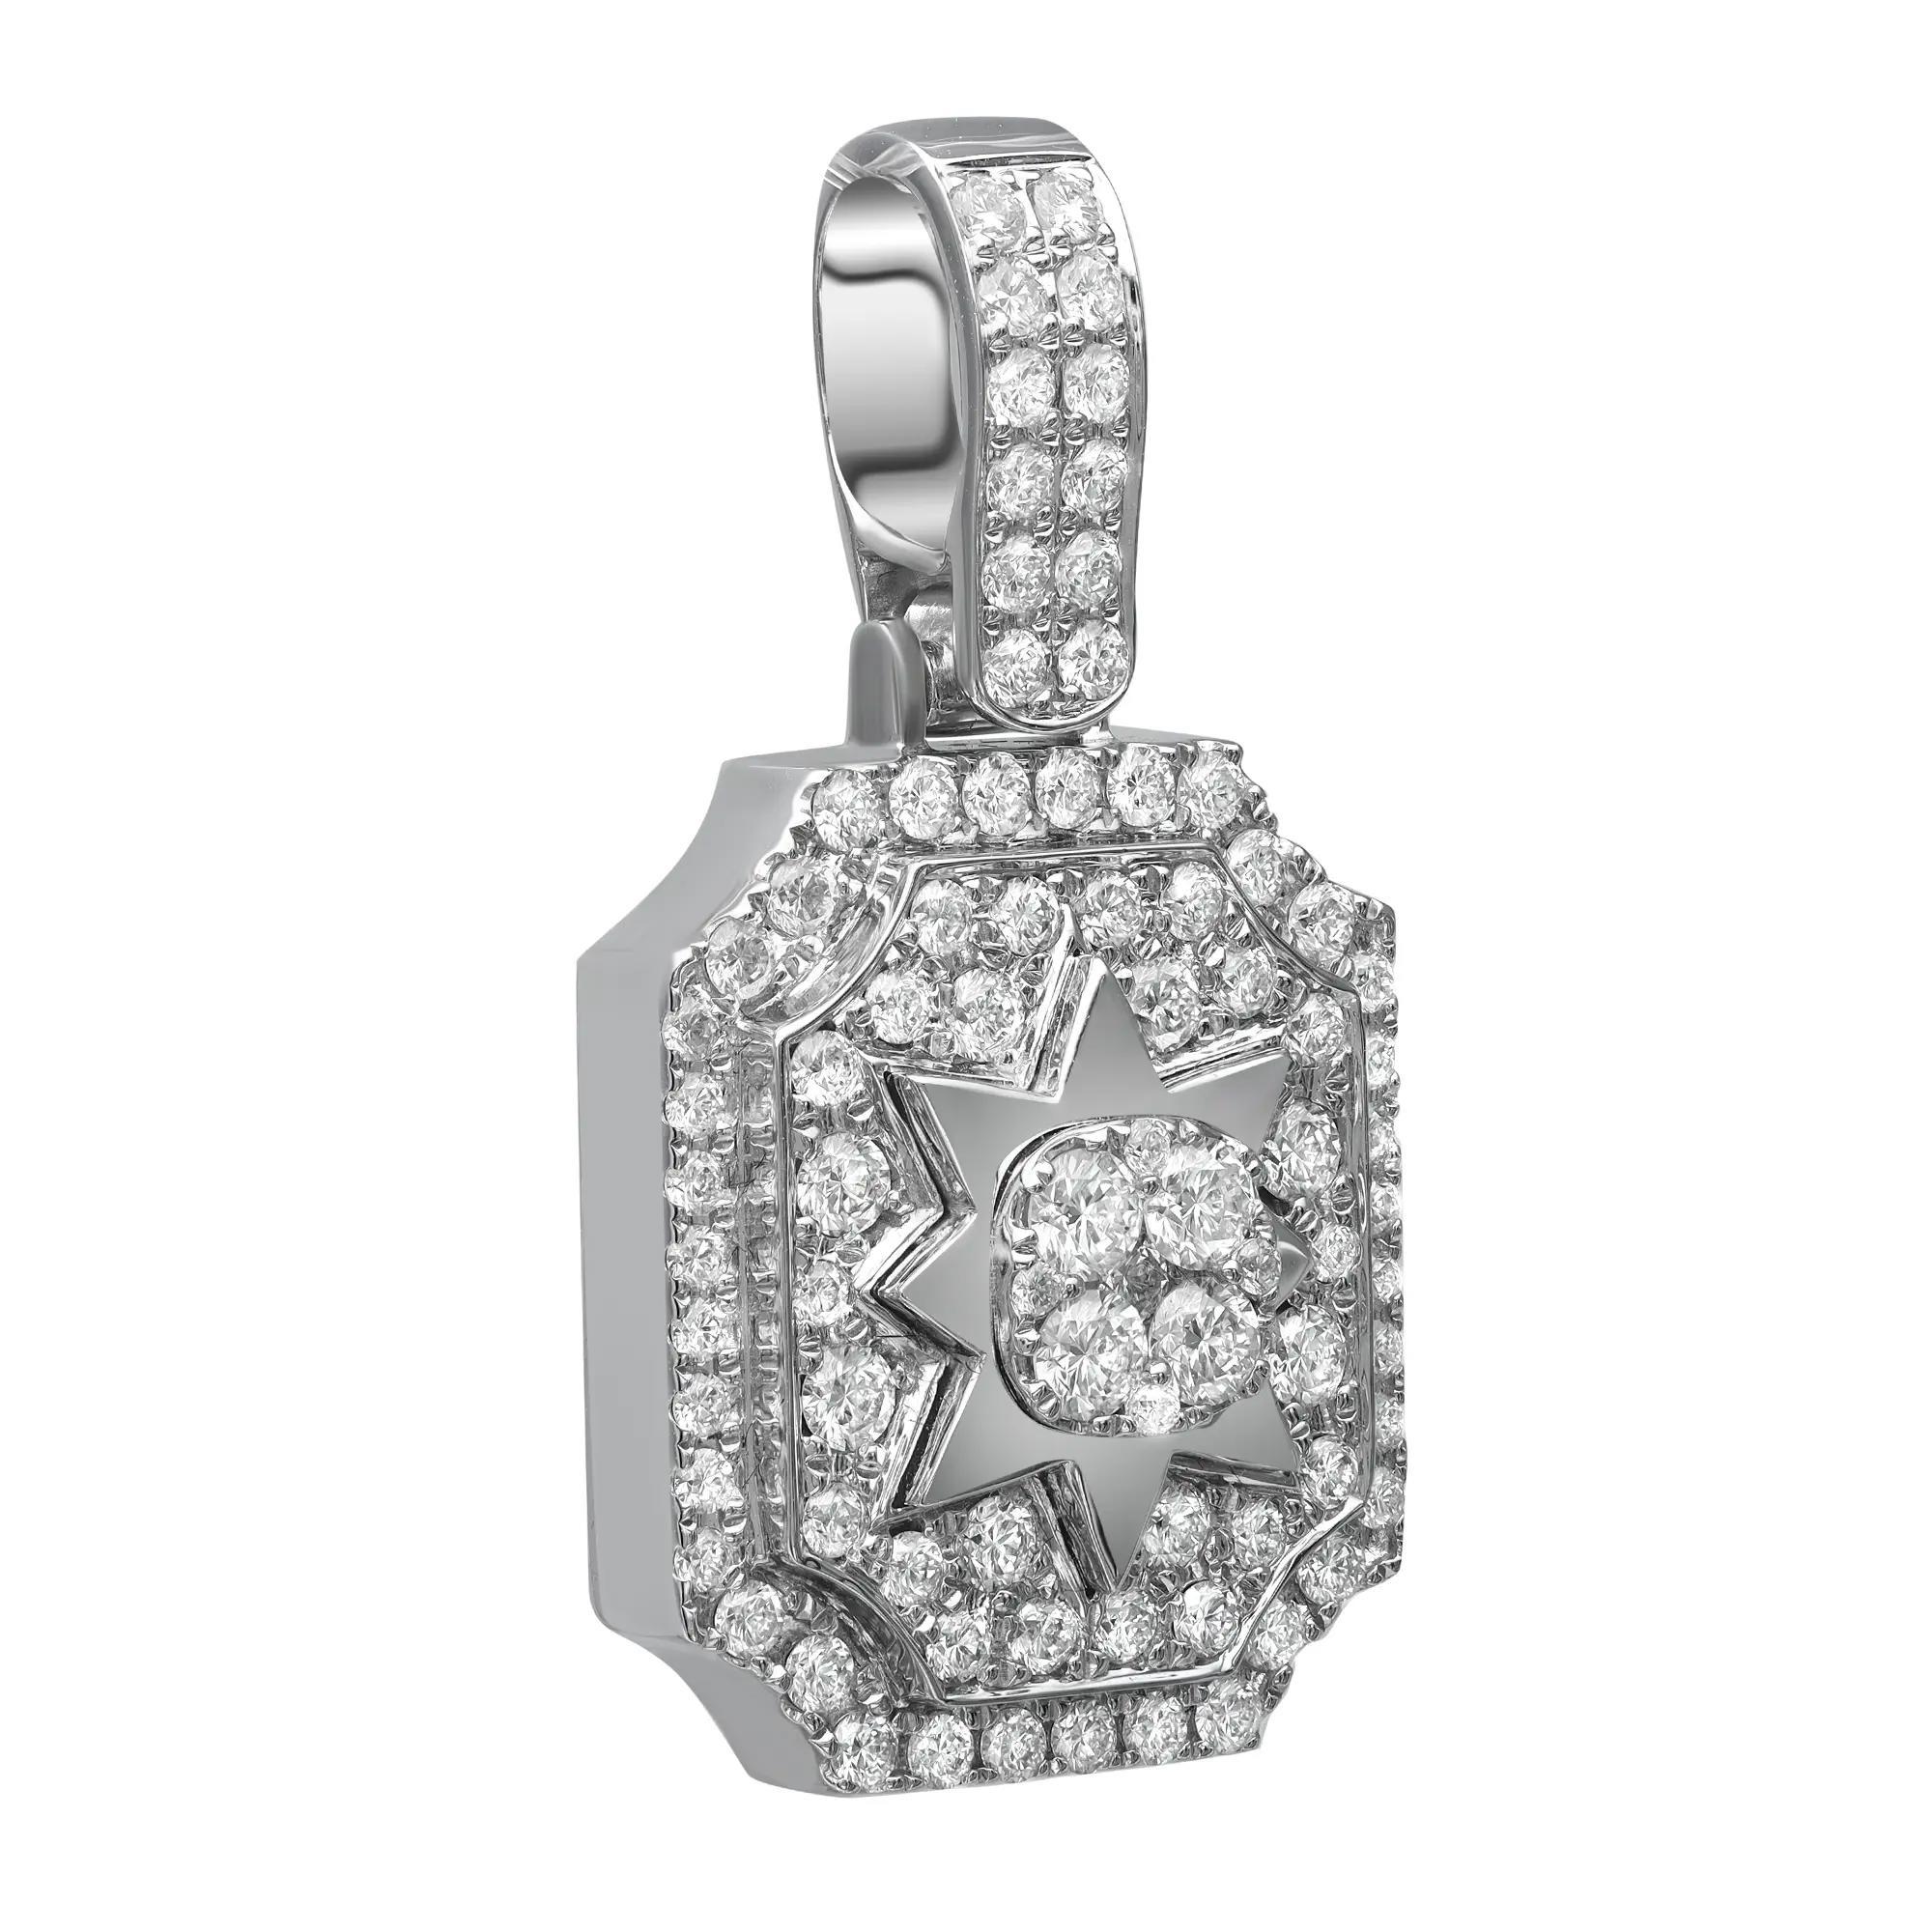 Sparkling bright white Men's diamond pendant crafted in lustrous 14K white gold. It features, pave set round brilliant cut diamonds studded in an octagon shape pendant with a center star. Total diamond weight: 1.61 carats. Diamond color G-H and